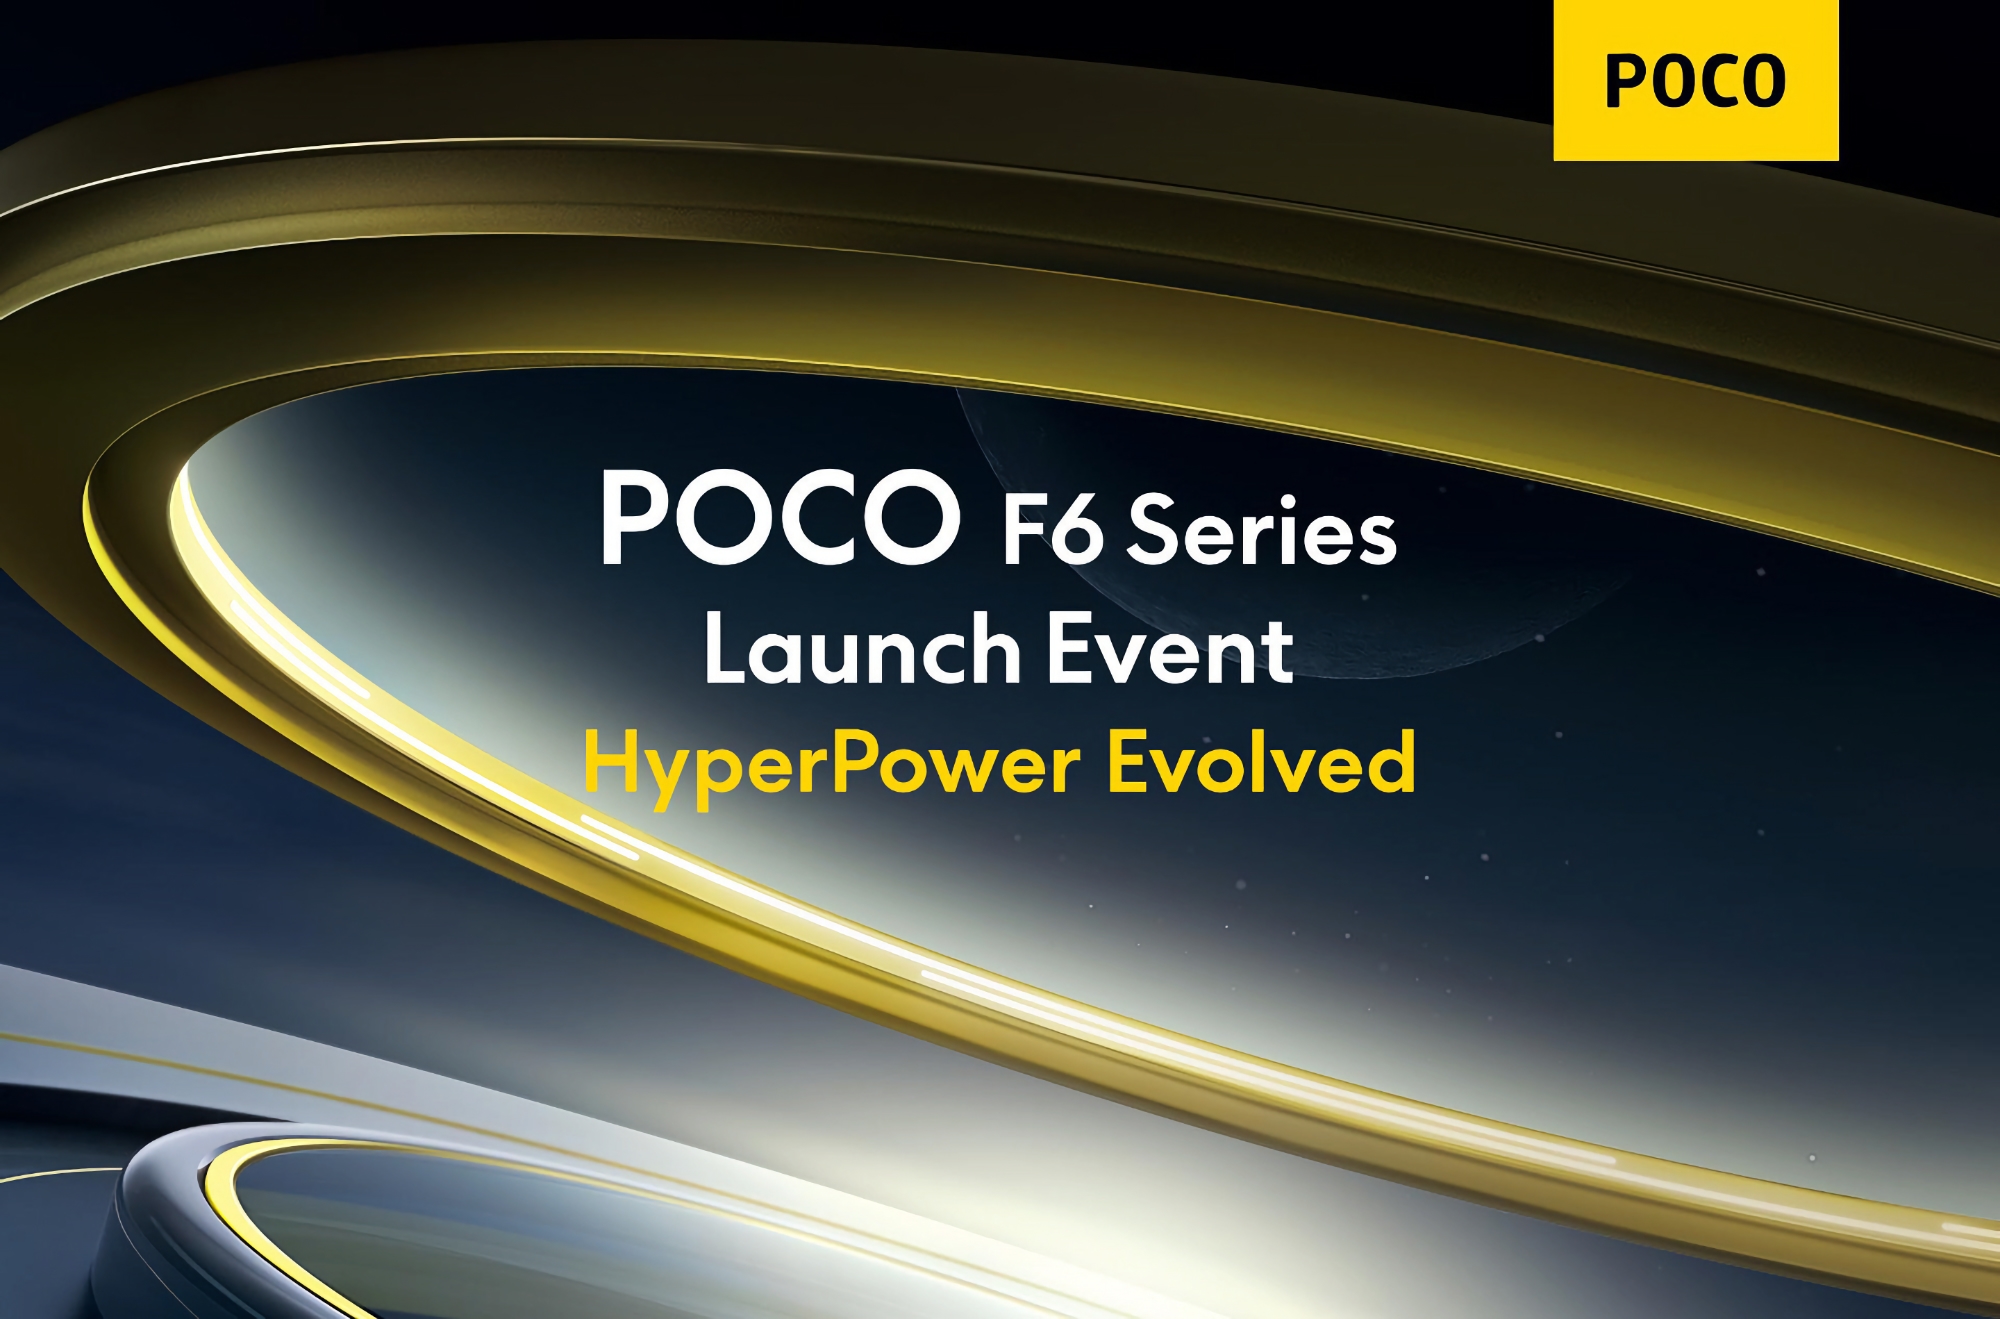 Where and when to watch the presentation of POCO F6, POCO F6 Pro smartphones and POCO Pad tablet